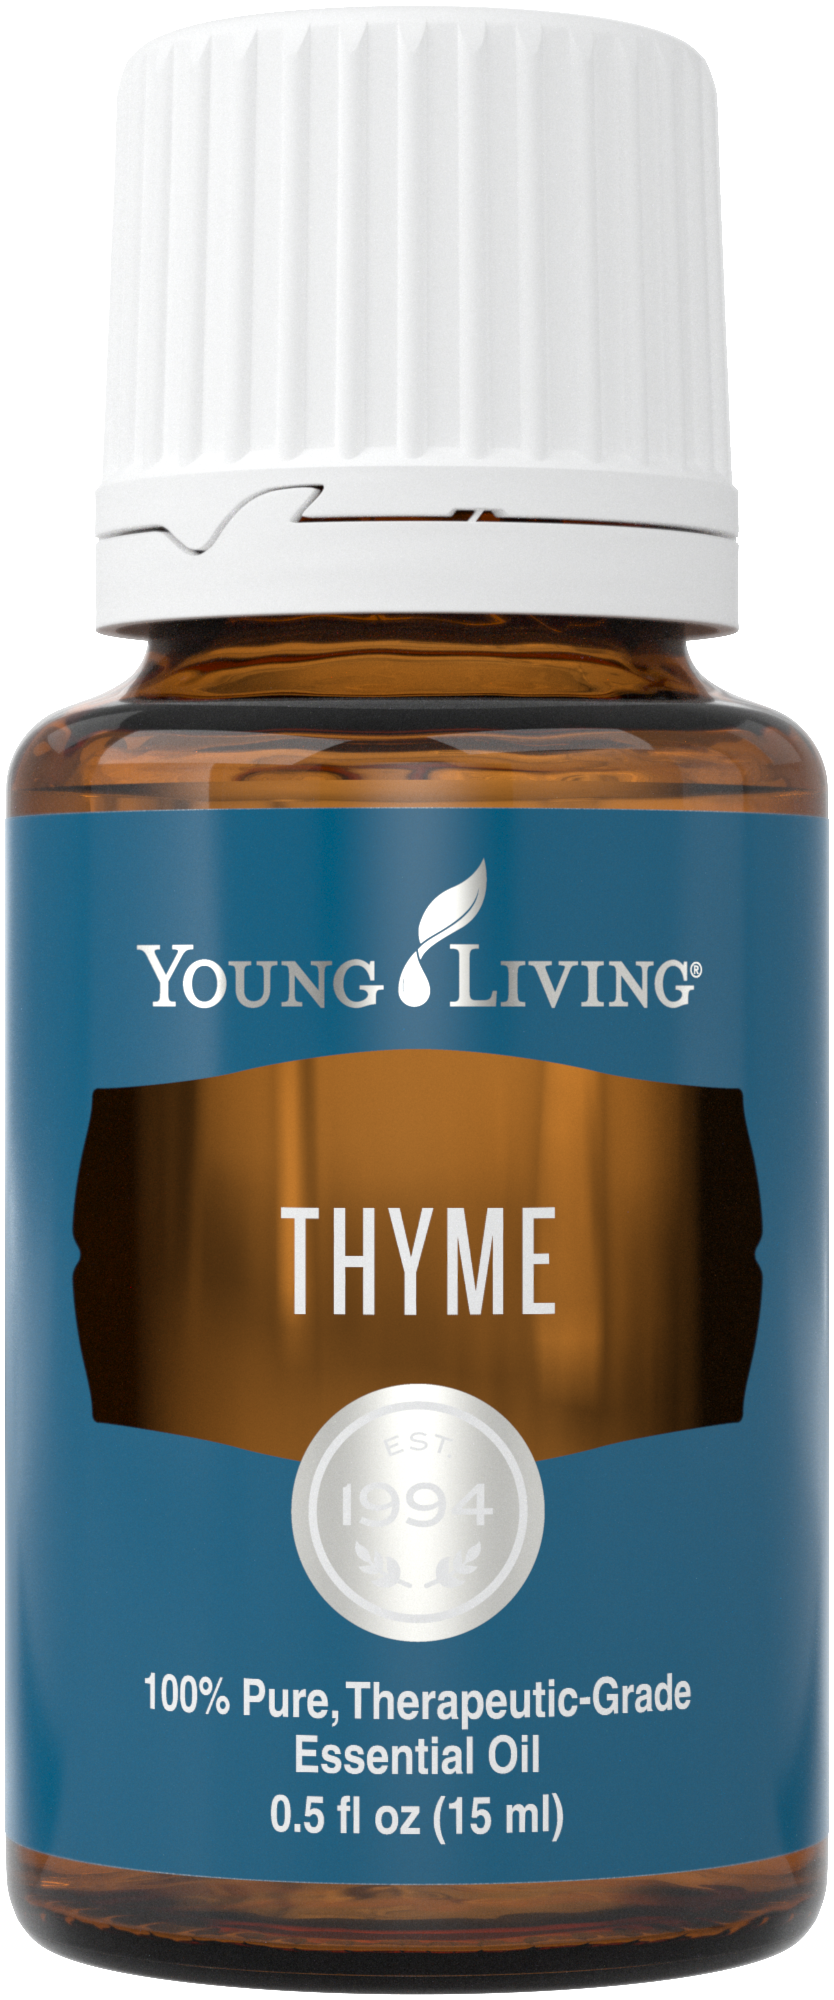 Thyme 15ml Silo.png